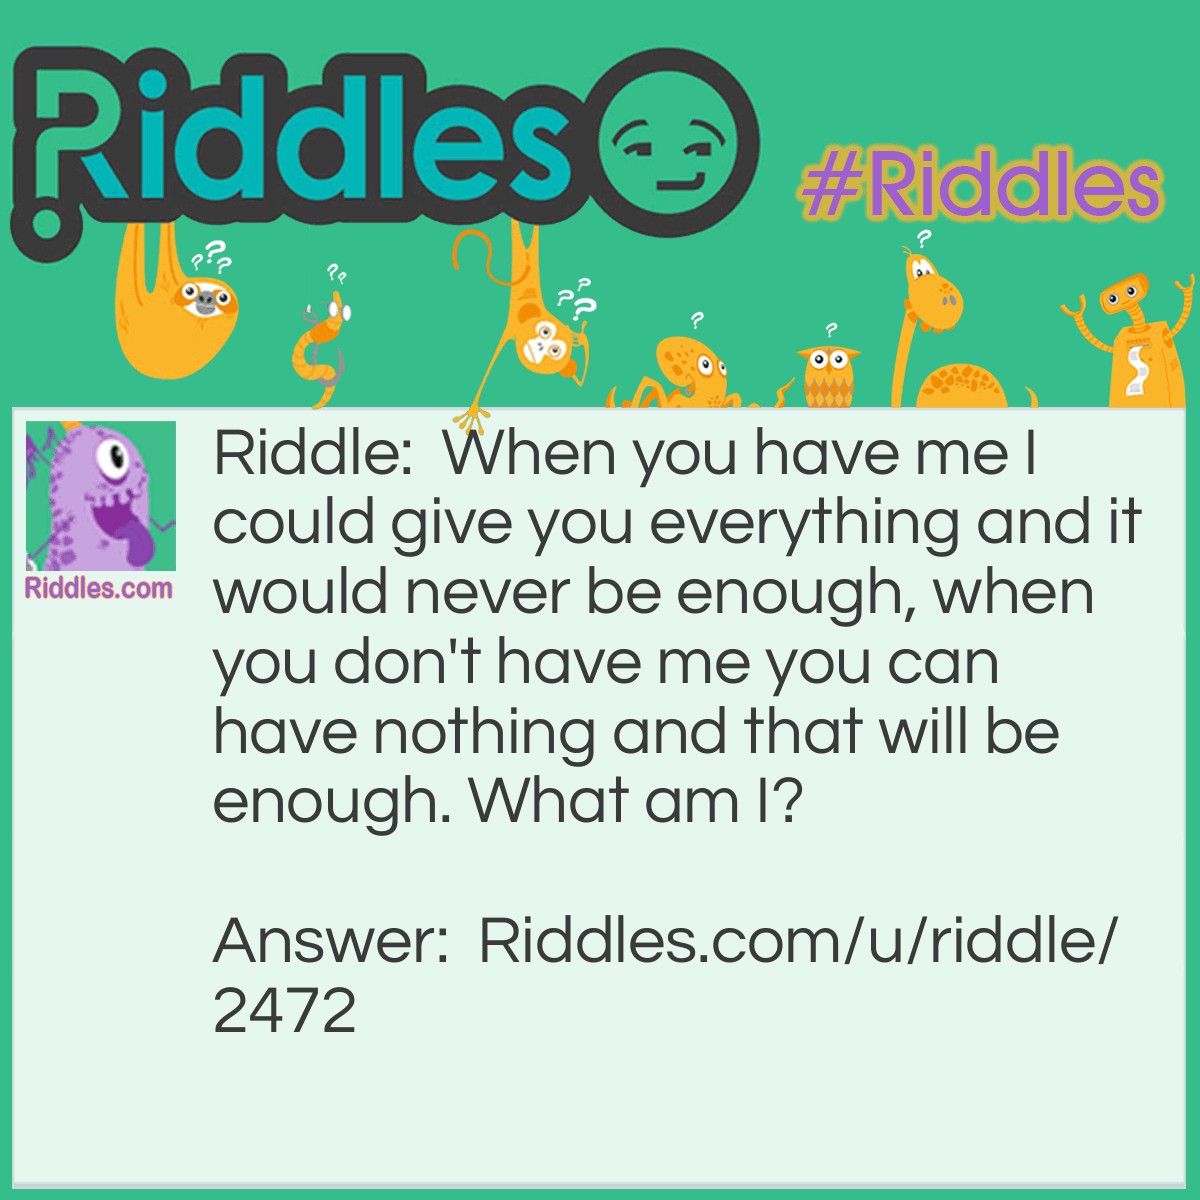 Riddle: When you have me I could give you everything and it would never be enough, when you don't have me you can have nothing and that will be enough. What am I? Answer: Greed.